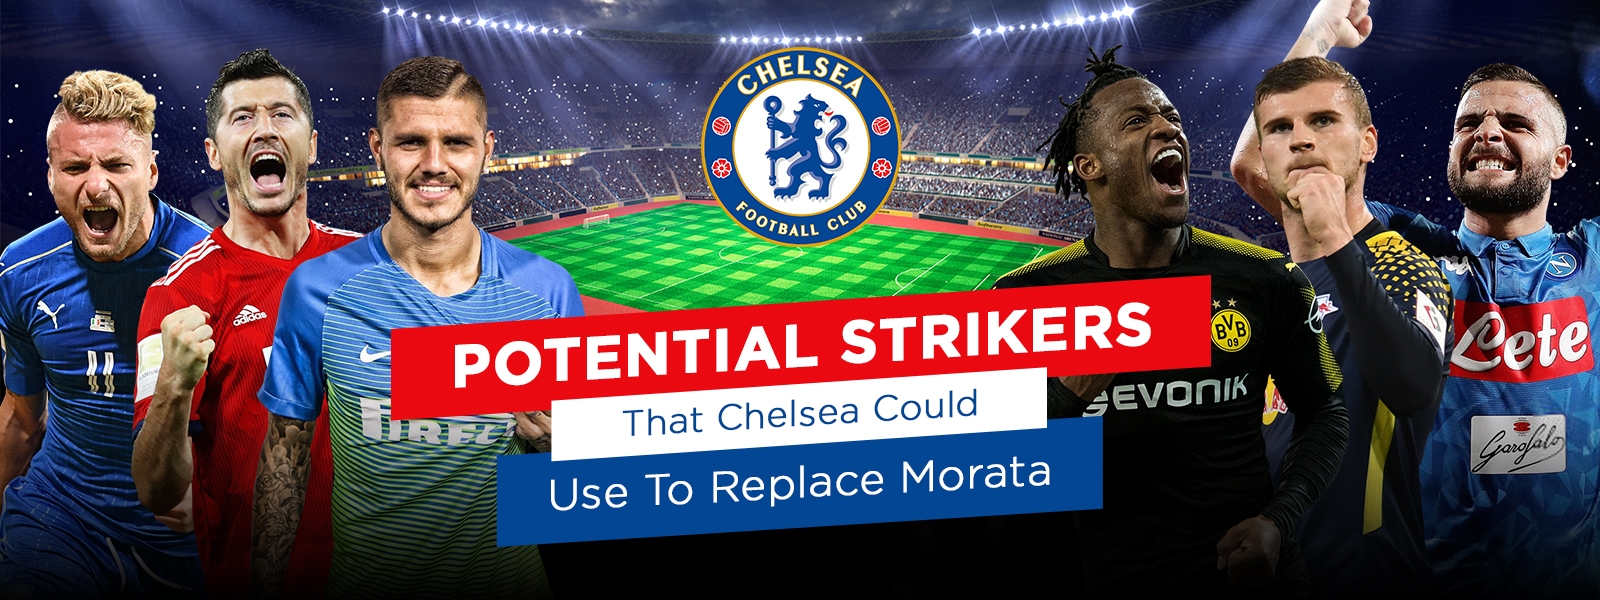 Potential Strikers That Chelsea Could Use To Replace Morata